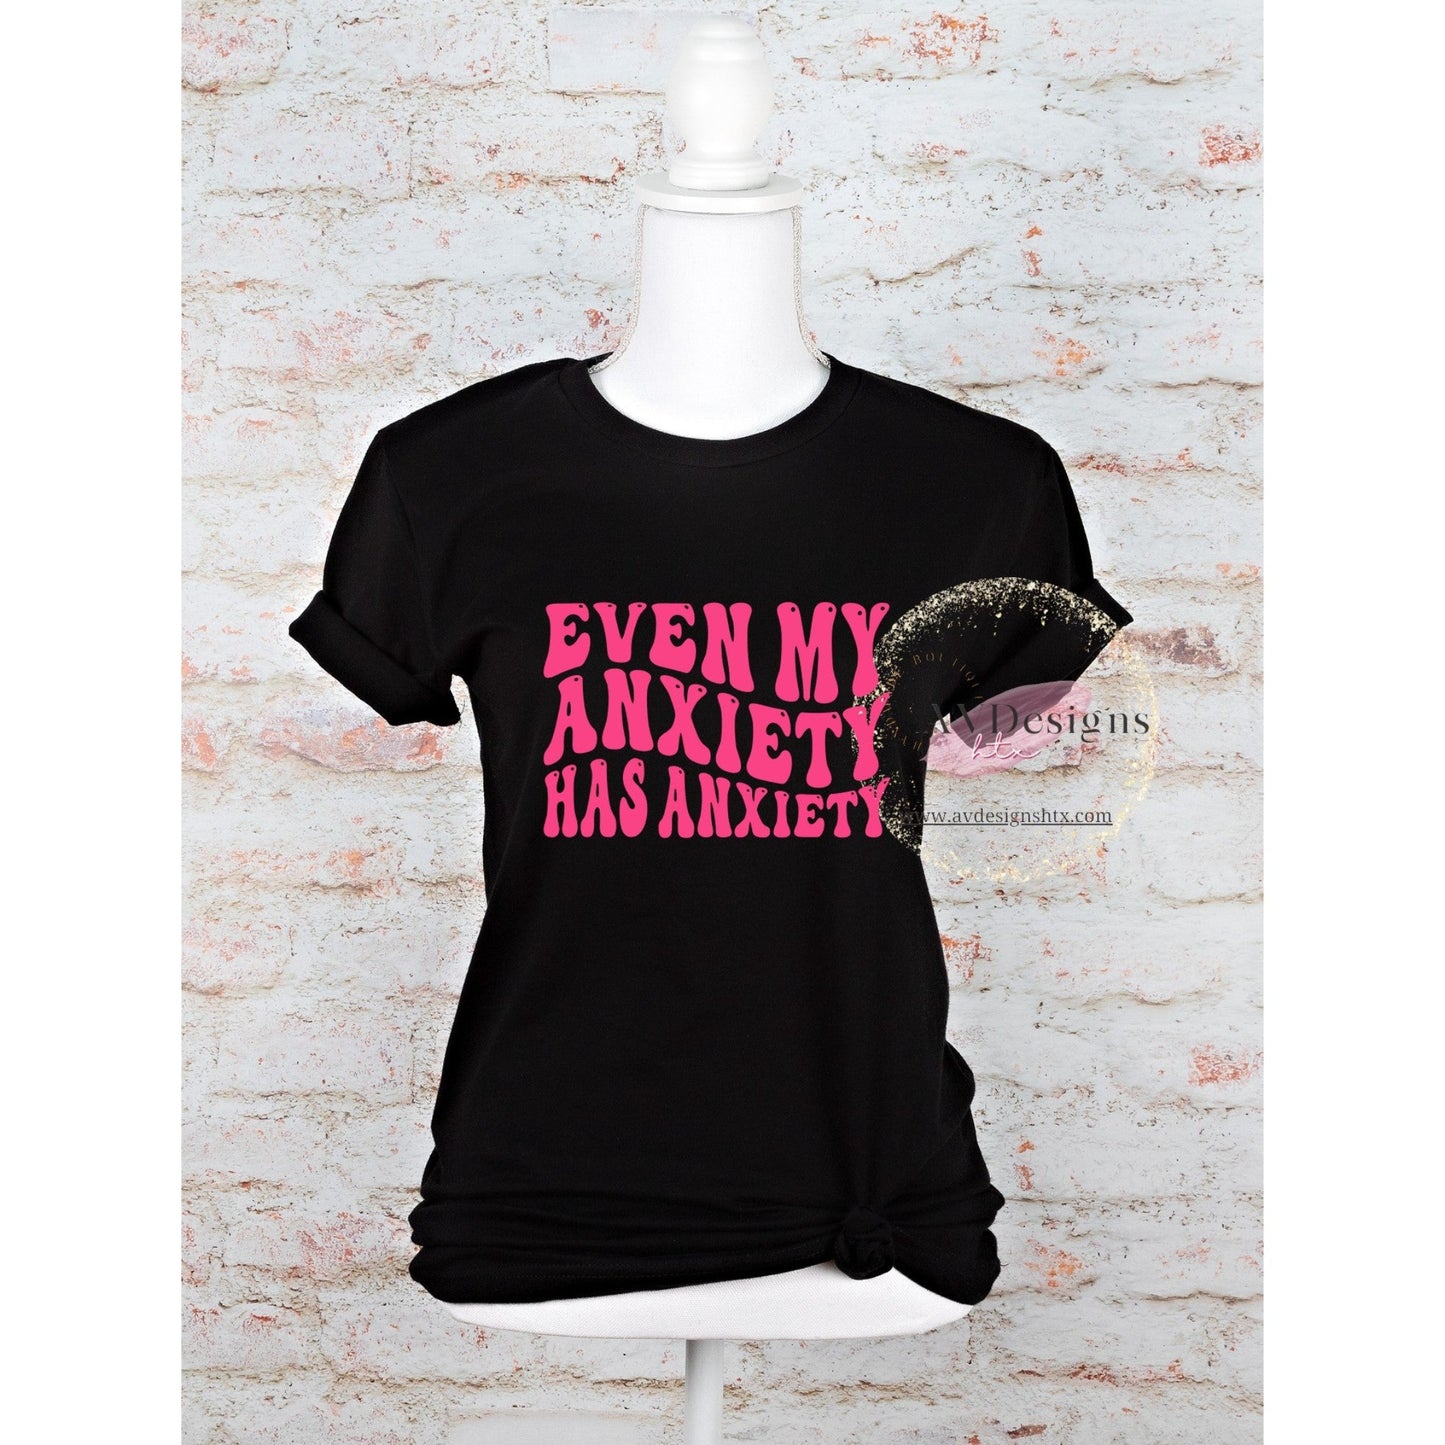 Even my Anxiety has Anxiety T-shirt